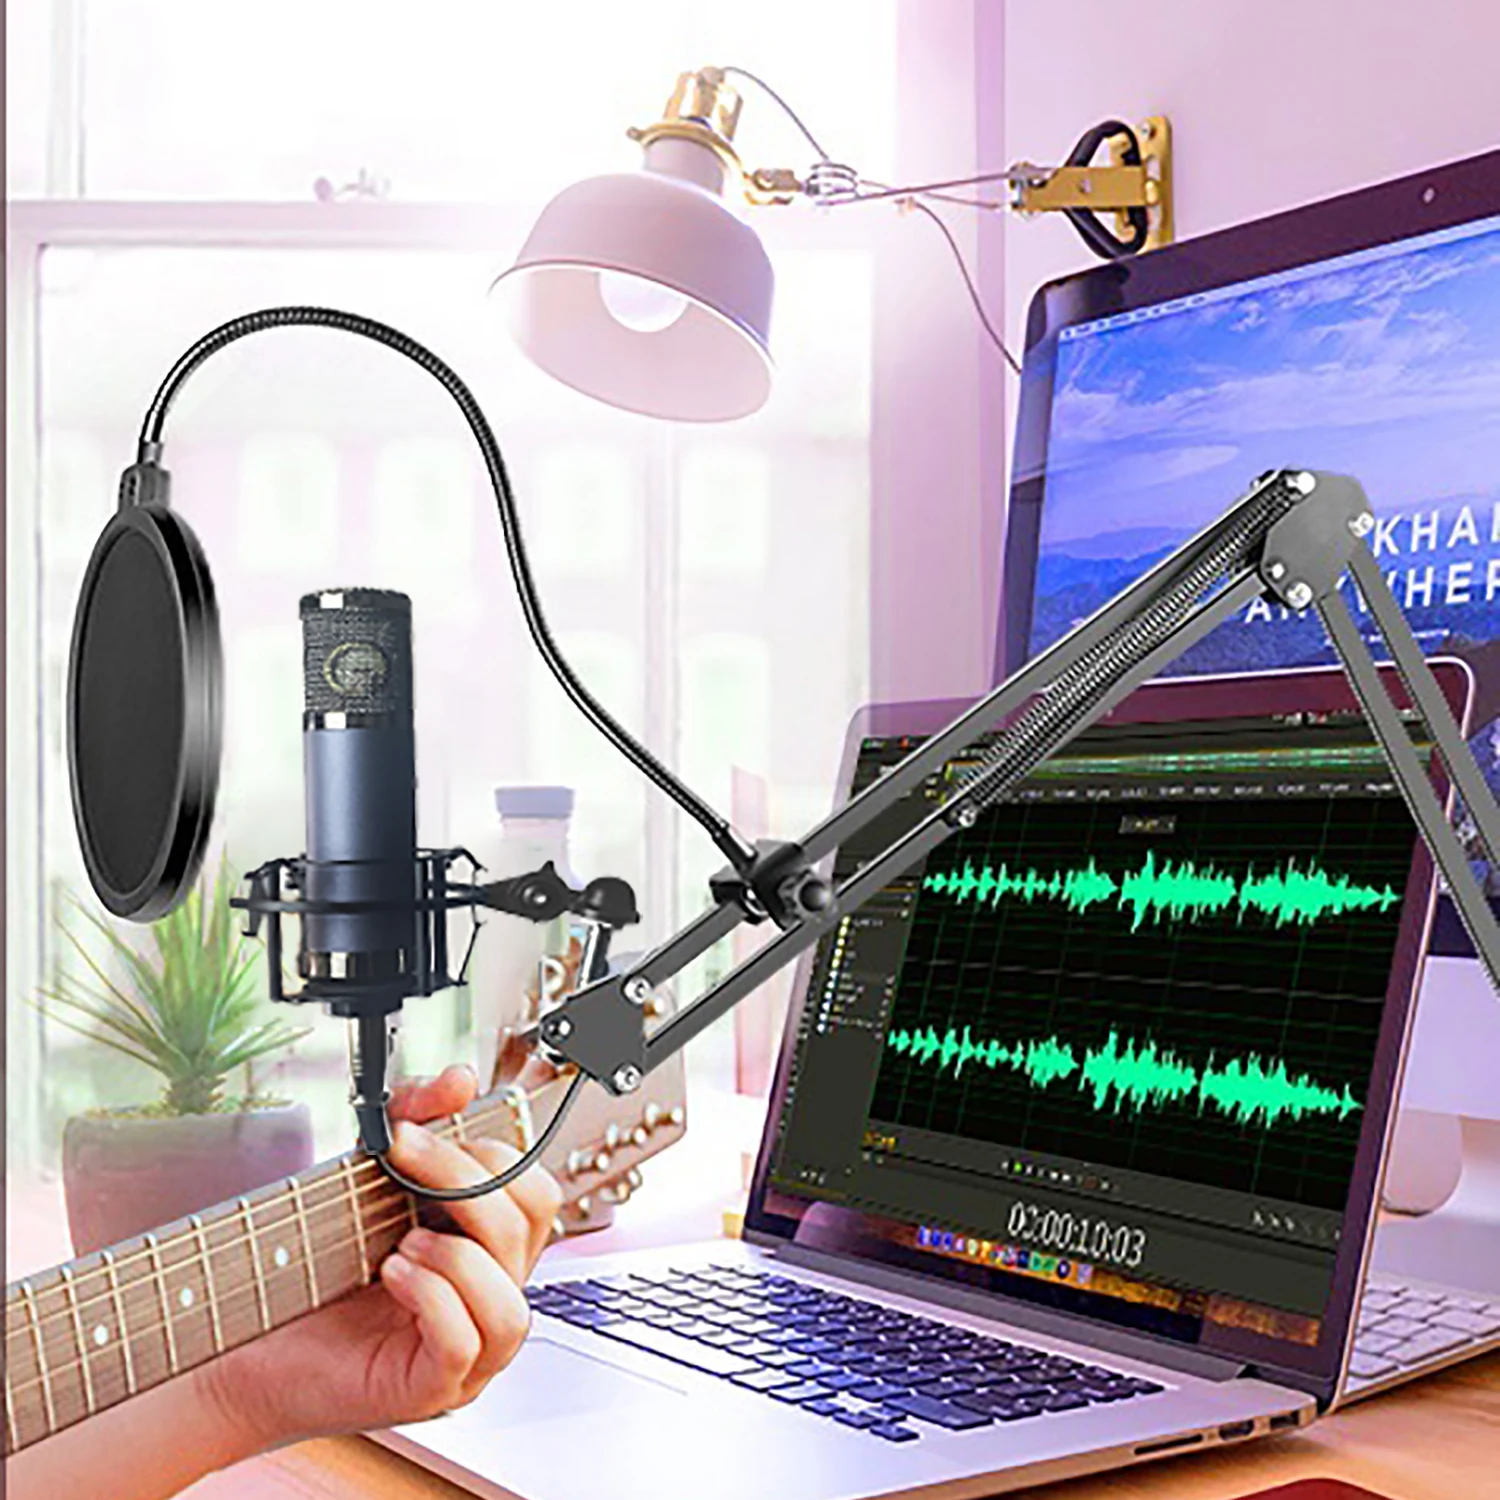 

GAM-F26 26mm Large Diaphragm Professional Condenser Microphone Shock Mount Mic For Gaming Recording Singing Podcast Living